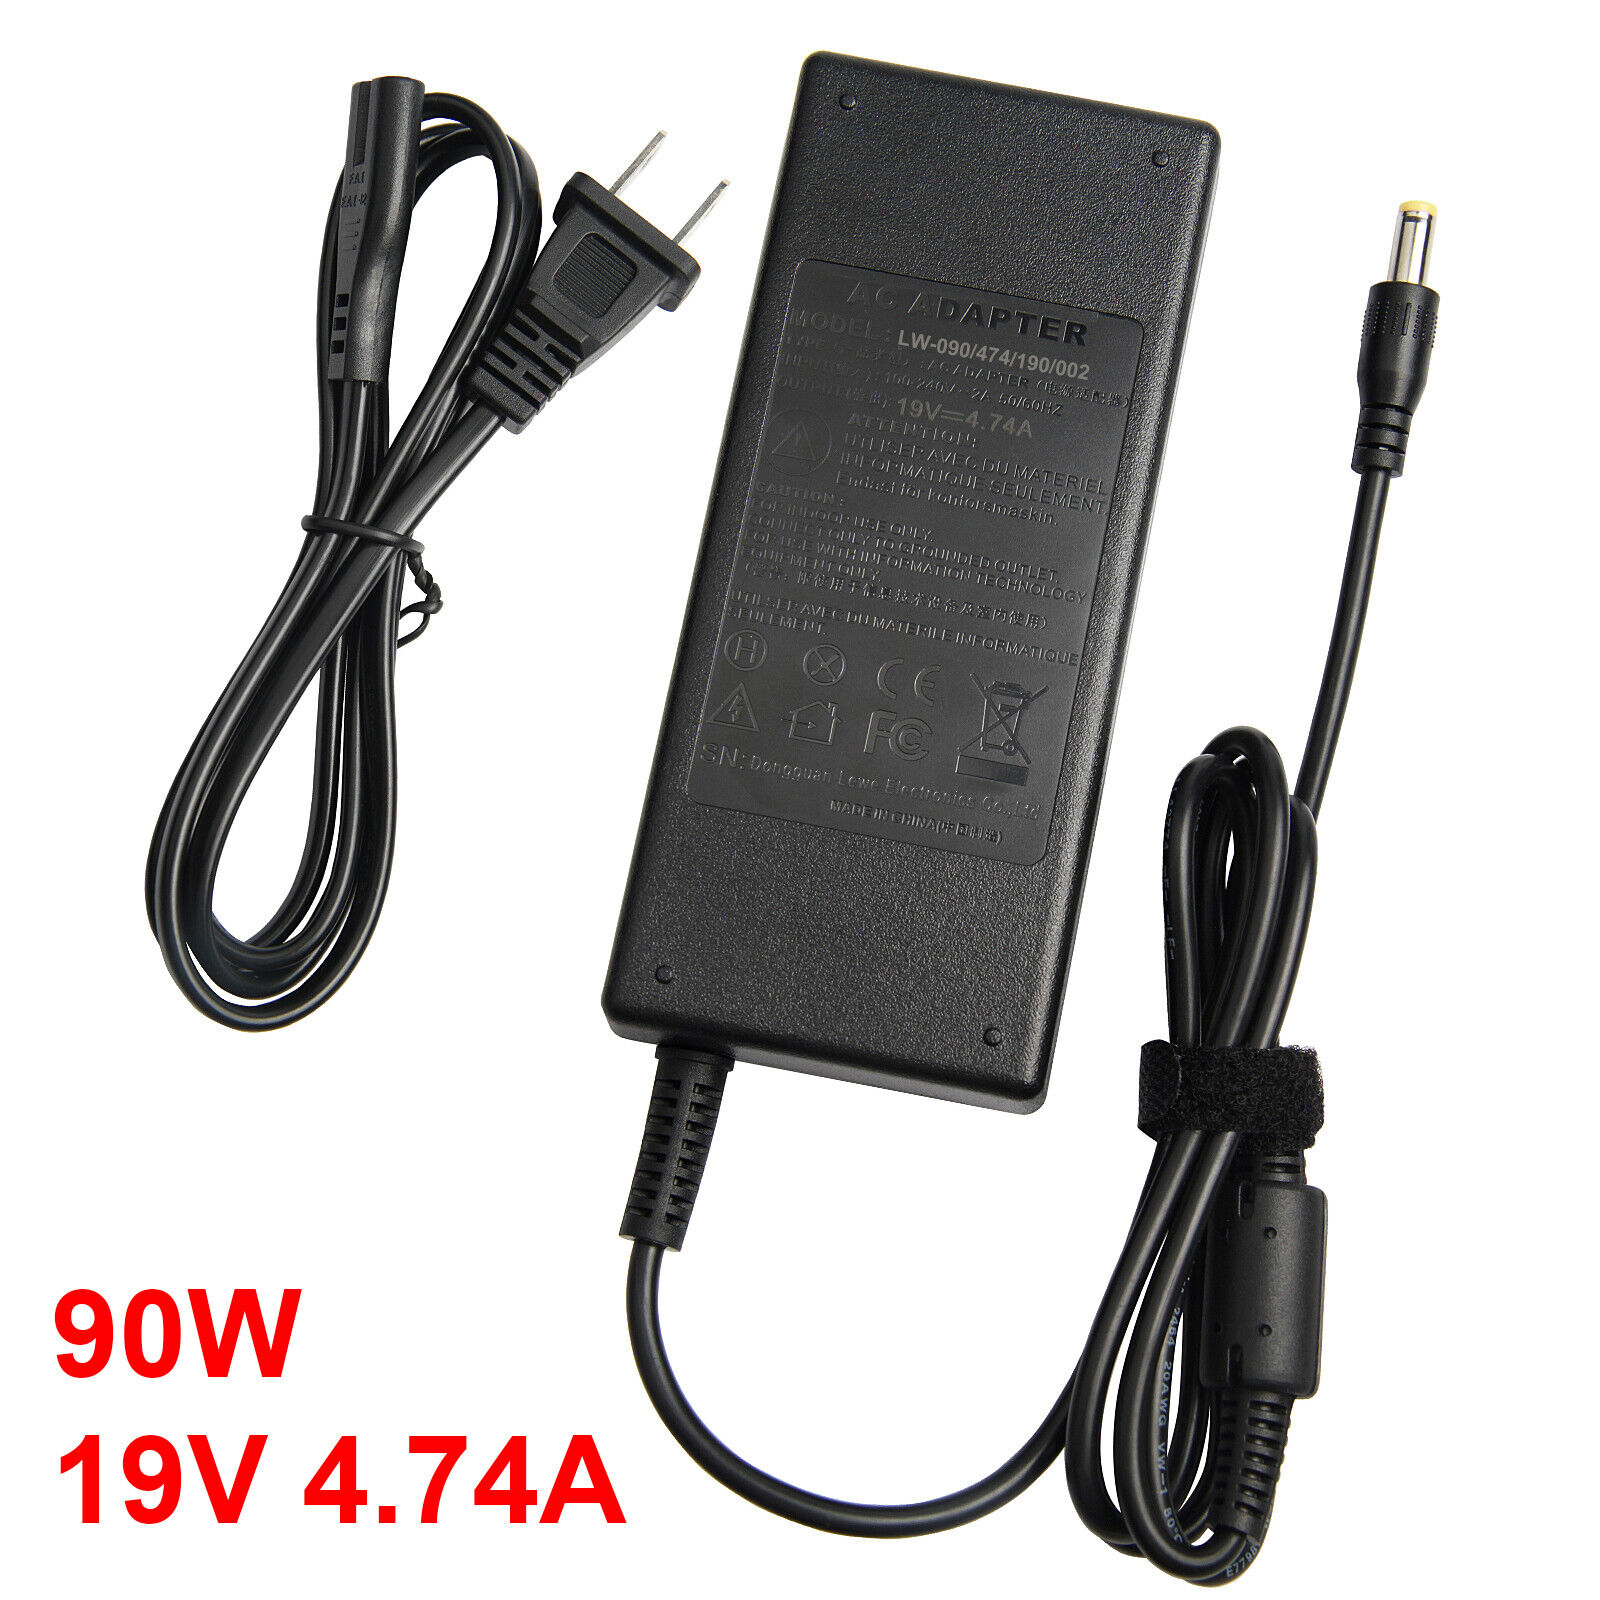 90W 65W Laptop Charger Power Supply for Toshiba Asus Fujisu Simens 5.5mm-2.5mm